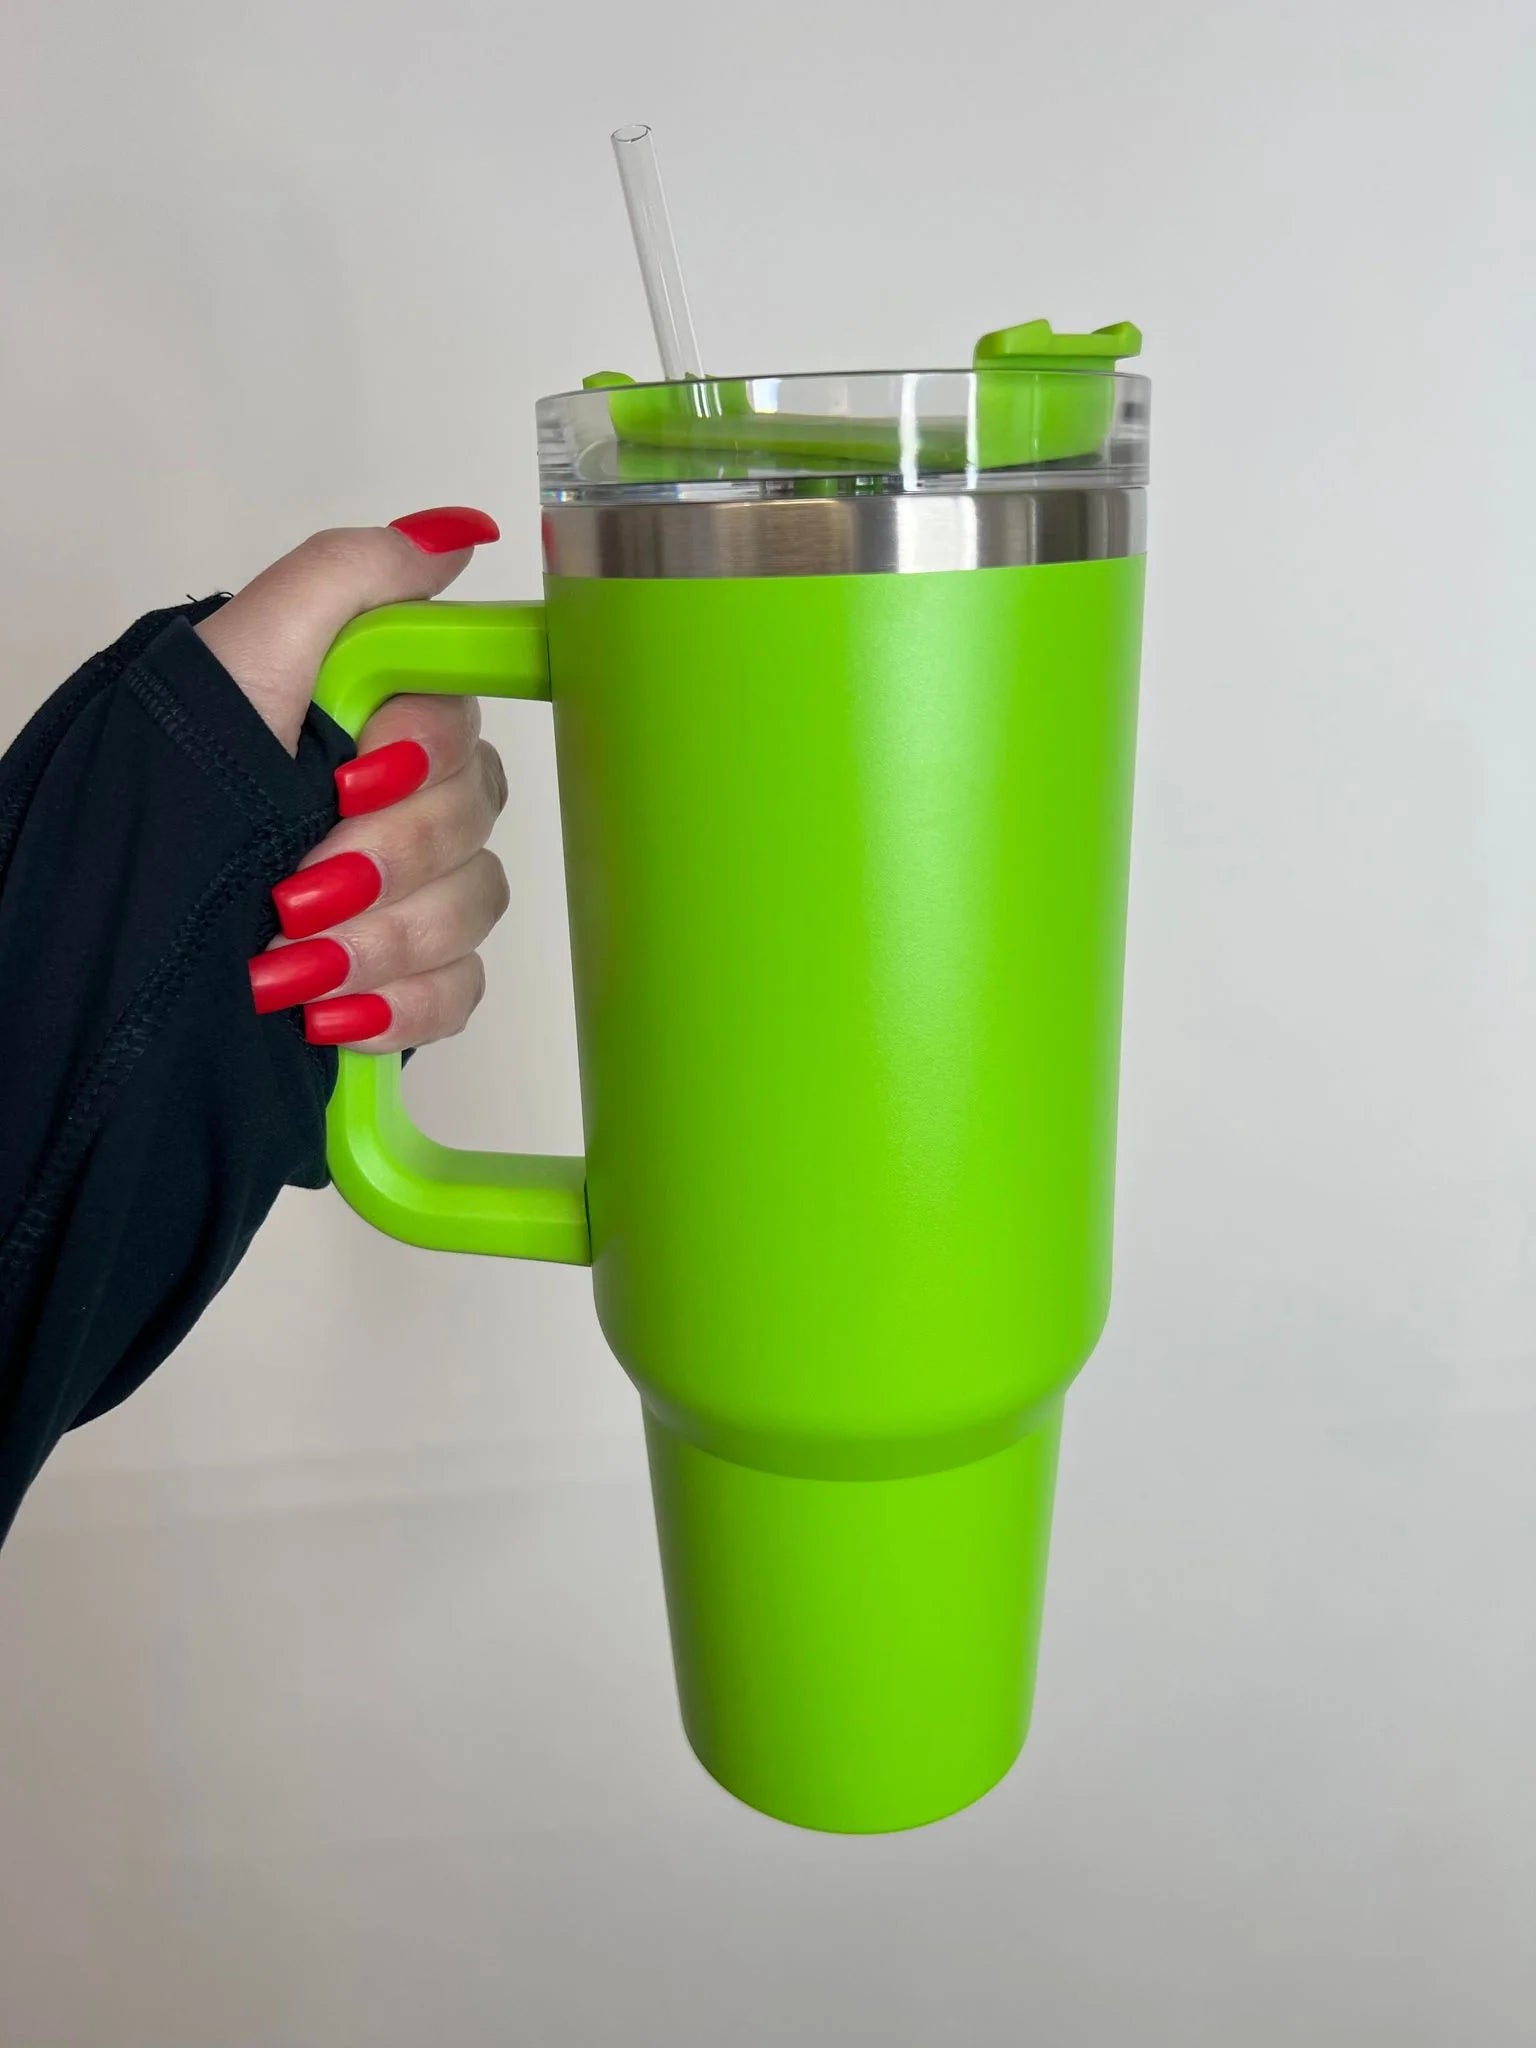 Rangland 40 oz Tumbler with Handle and Carrier Bag - Lime Green - Encased